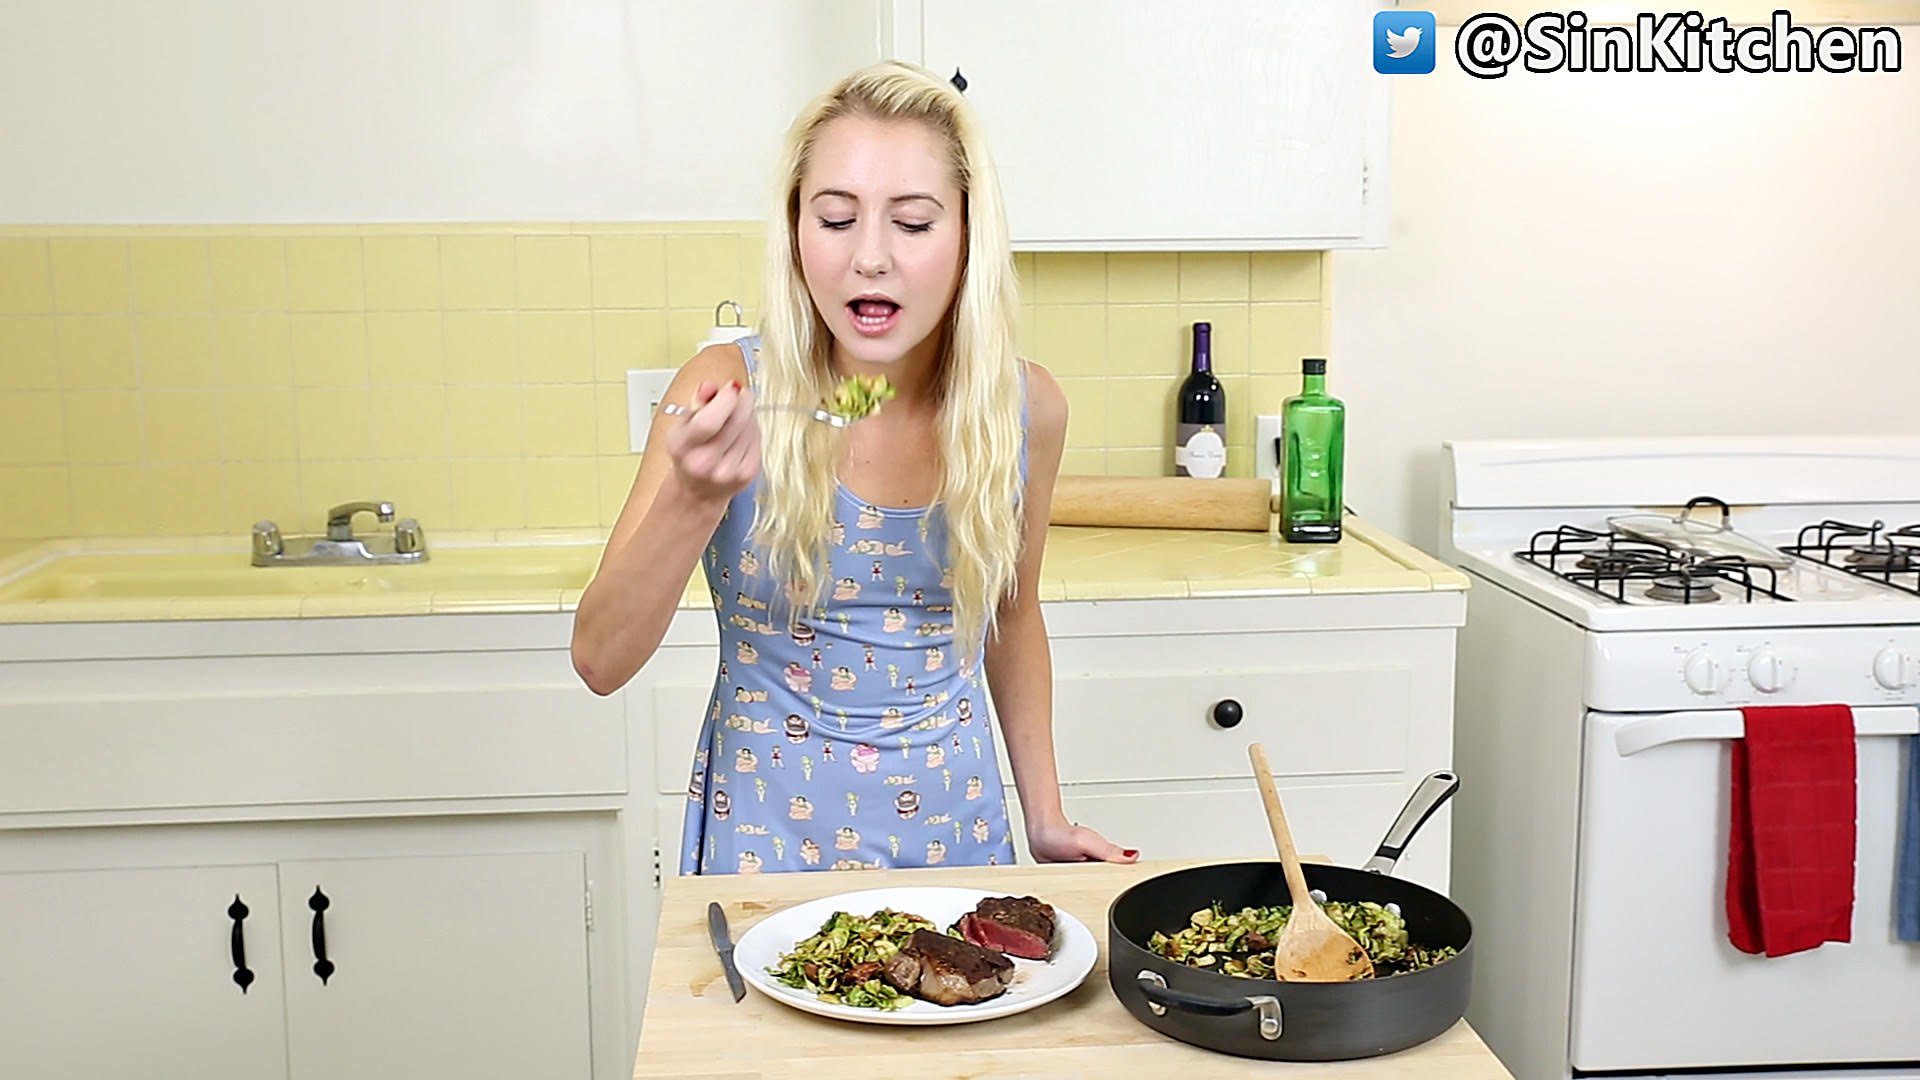 Tw Pornstars Odette Delacroix Twitter Watch Me Cook Some Meat Check Out My Episode Of